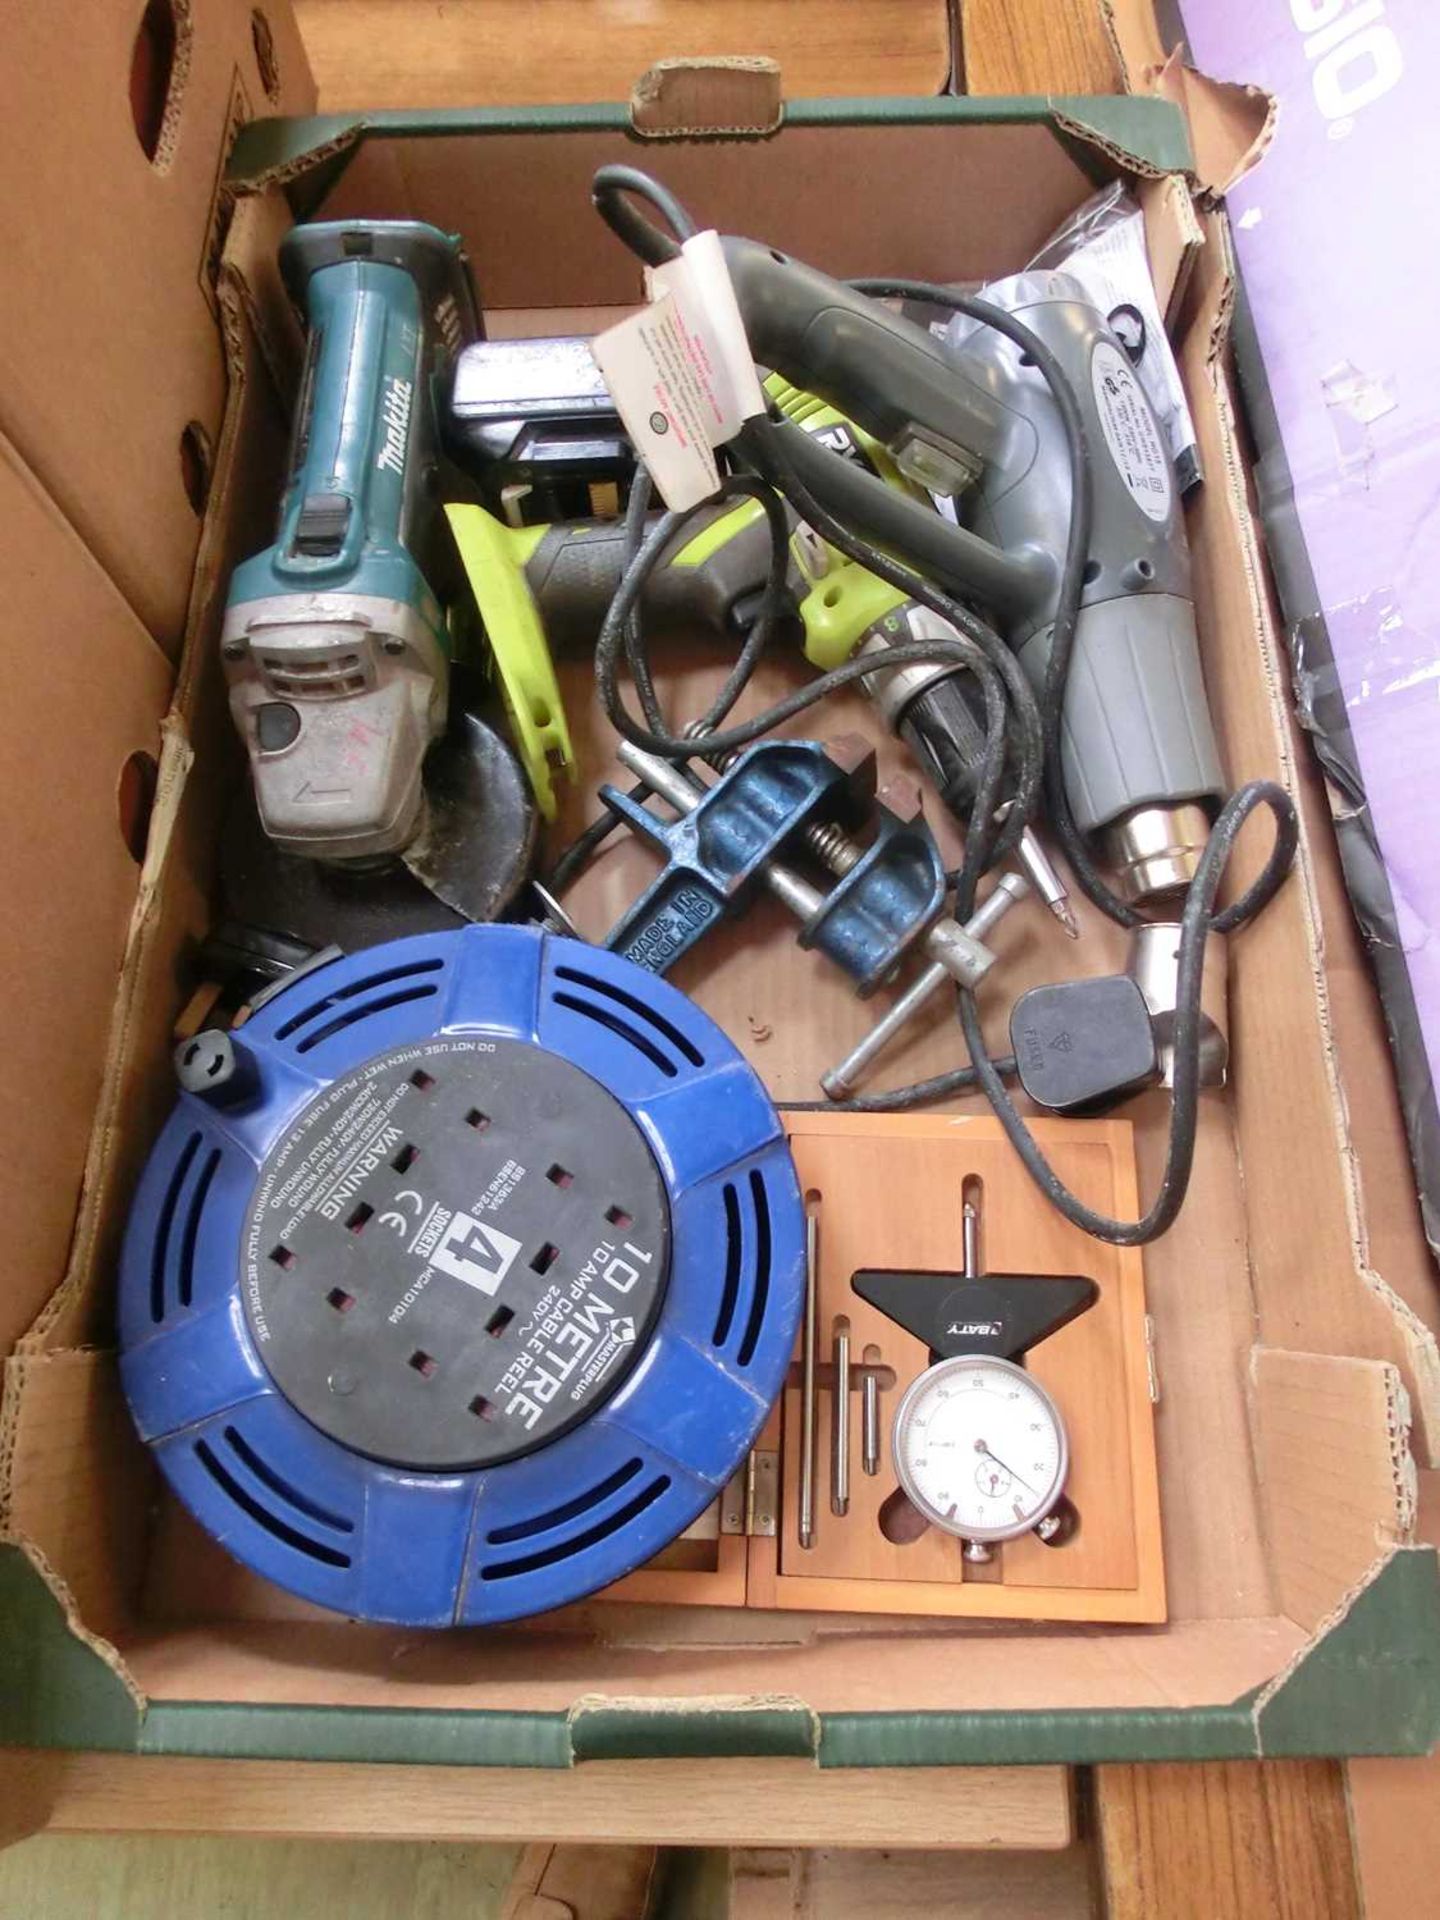 A tray containing power tools, extension cable, vice etc.